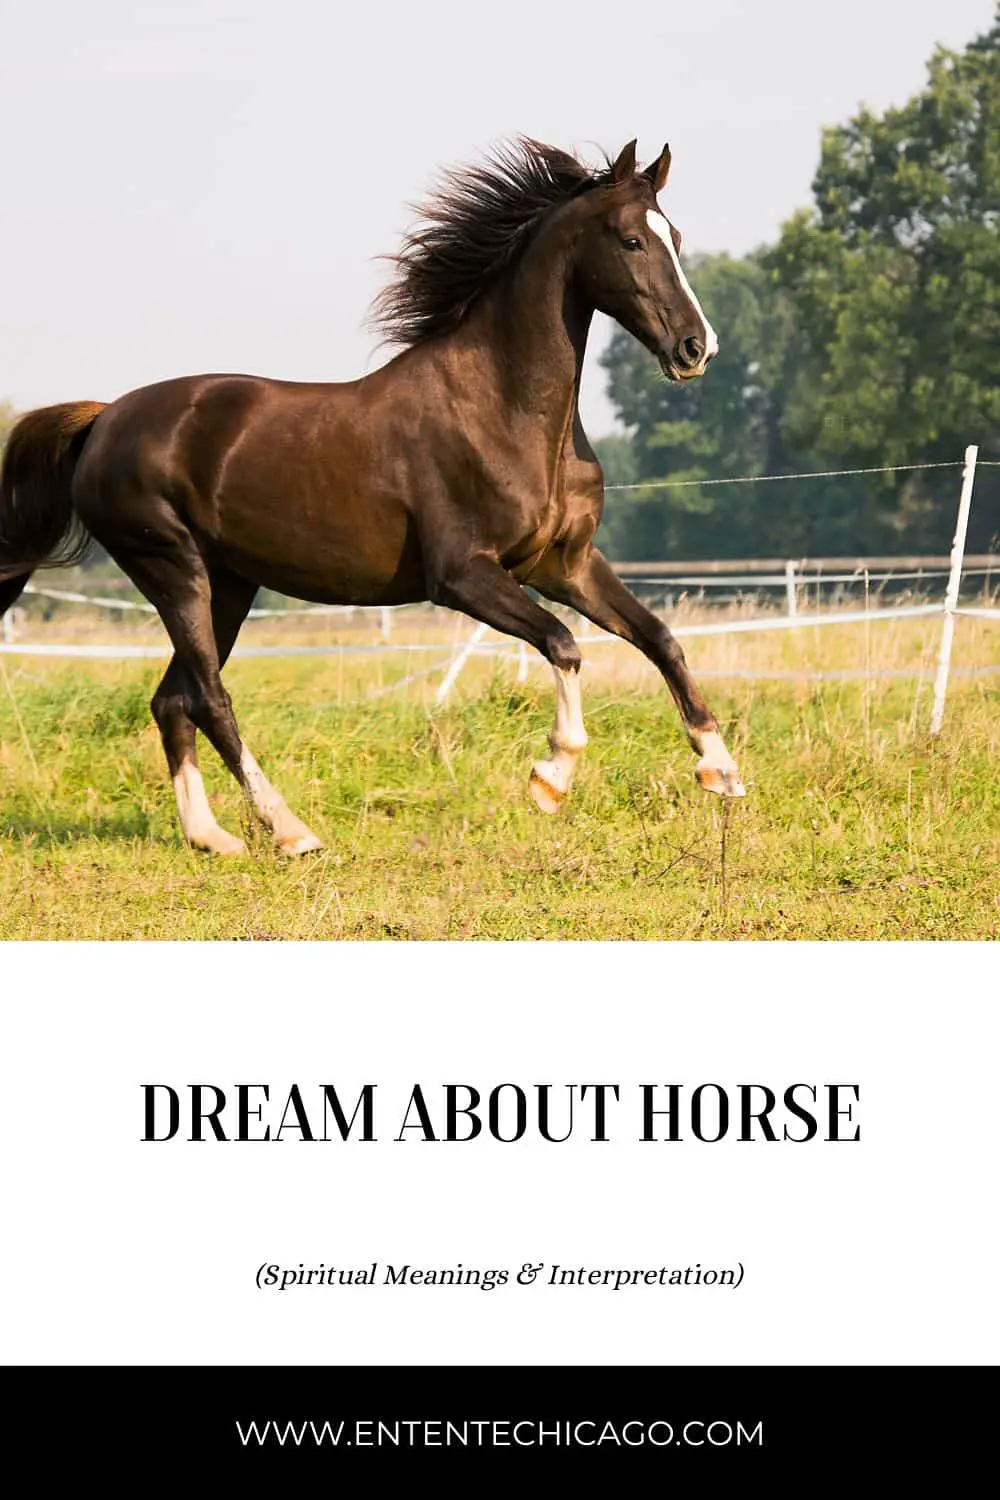 Dreaming Of A Horse: Other Meanings